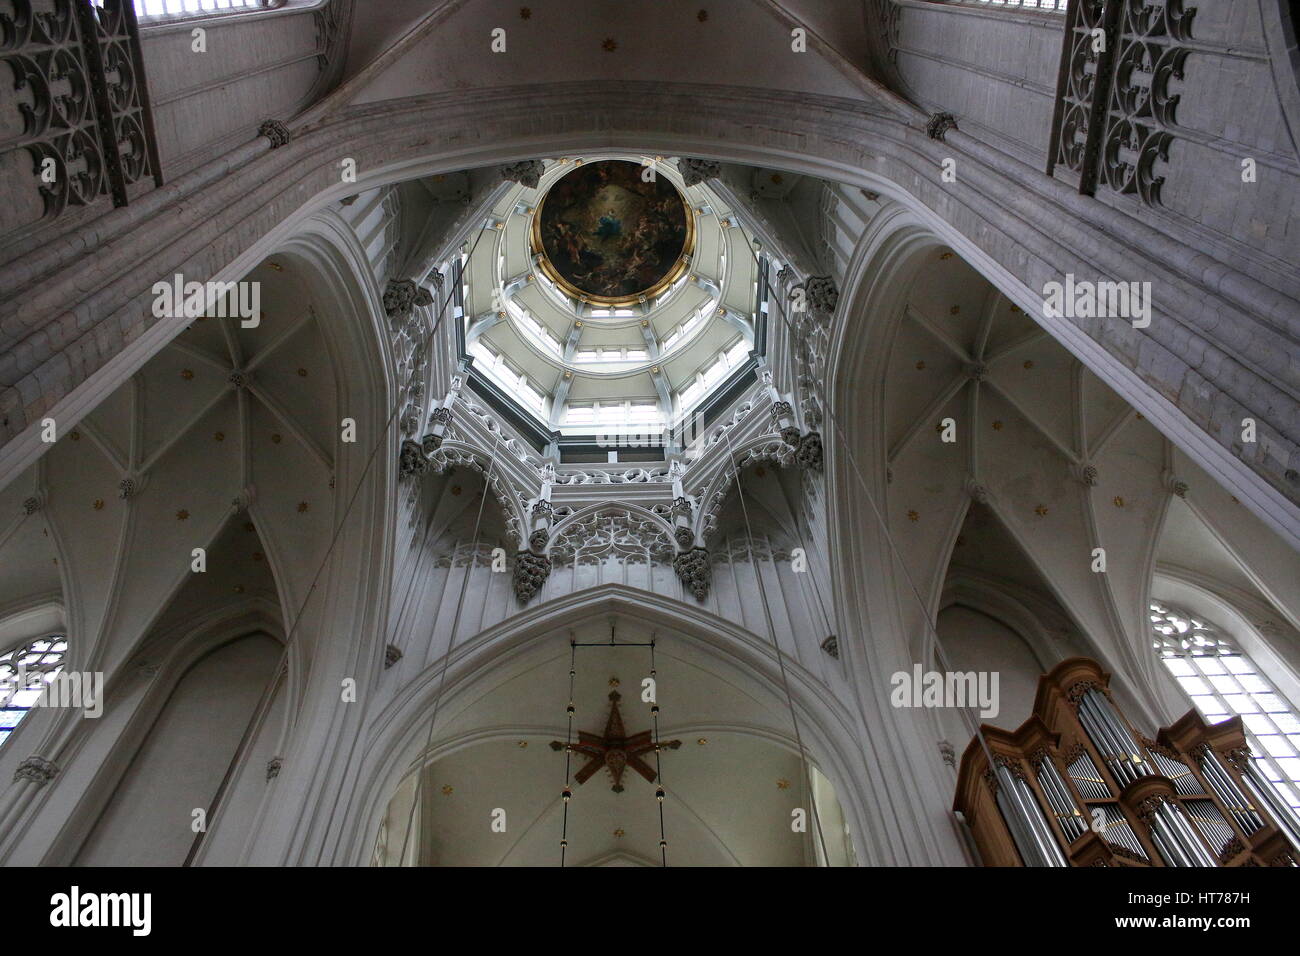 Dome and roof of the Gothic Cathedral of our Lady (Onze-lieve-vrouwekathedraal), Antwerp, Belgium Stock Photo